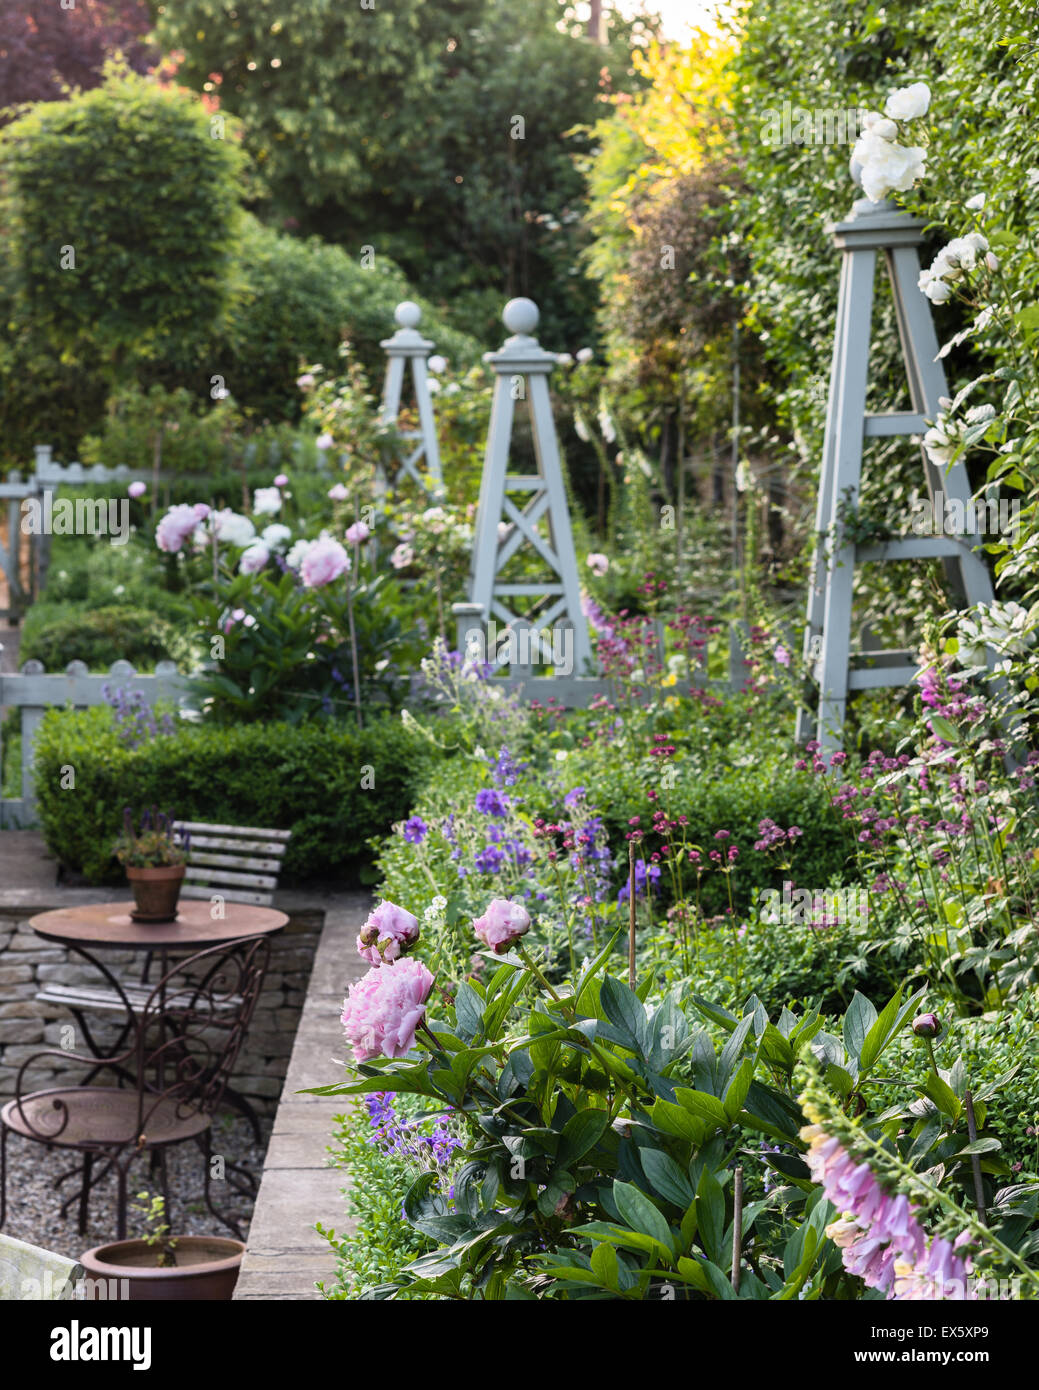 Peonies in country garden with plant stands Stock Photo